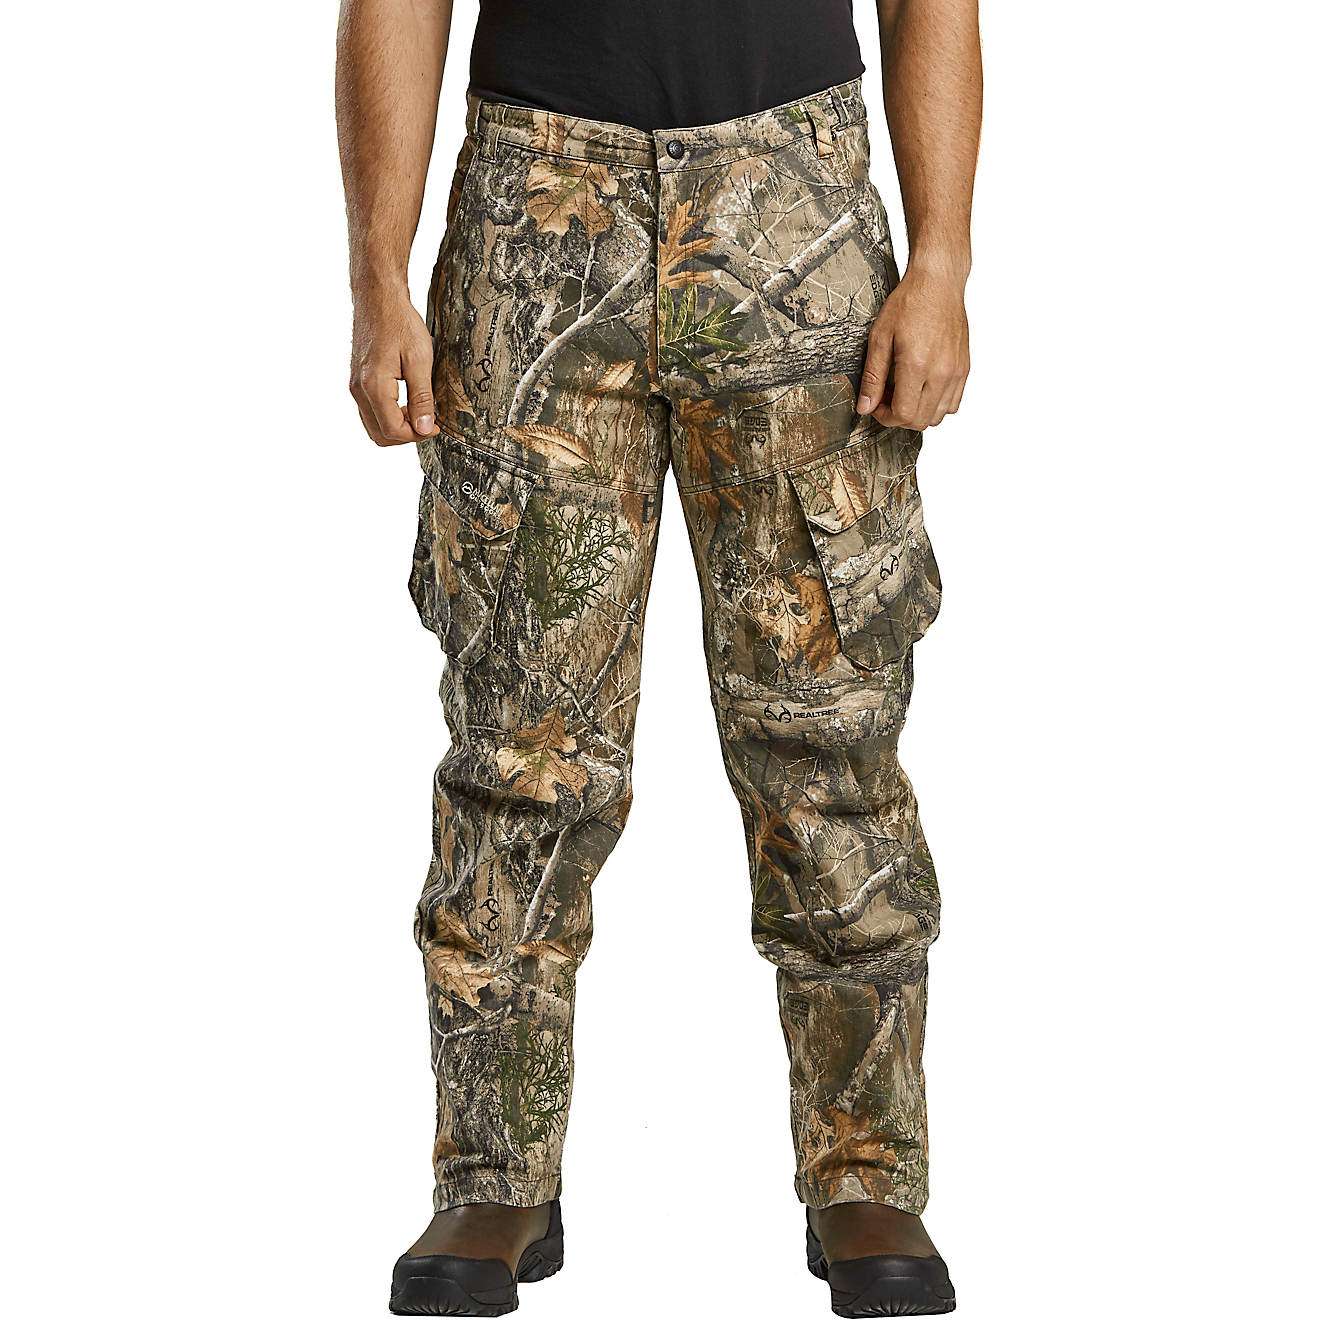 <p><strong>Magellan Outdoors Men's Camo Hill Country Hunting Pants</strong><br> Fall not only means great fishing, but it also means hunting season. Make sure you're geared up to hit the woods this fall. Magellan Outdoors offers camouflage clothing at a great value. The Camo Hill Country Hunting pants by Magellan Outdoors feature built-in TWILLFLEX technology and seven pockets to make for the ultimate hunting pants. <a href=